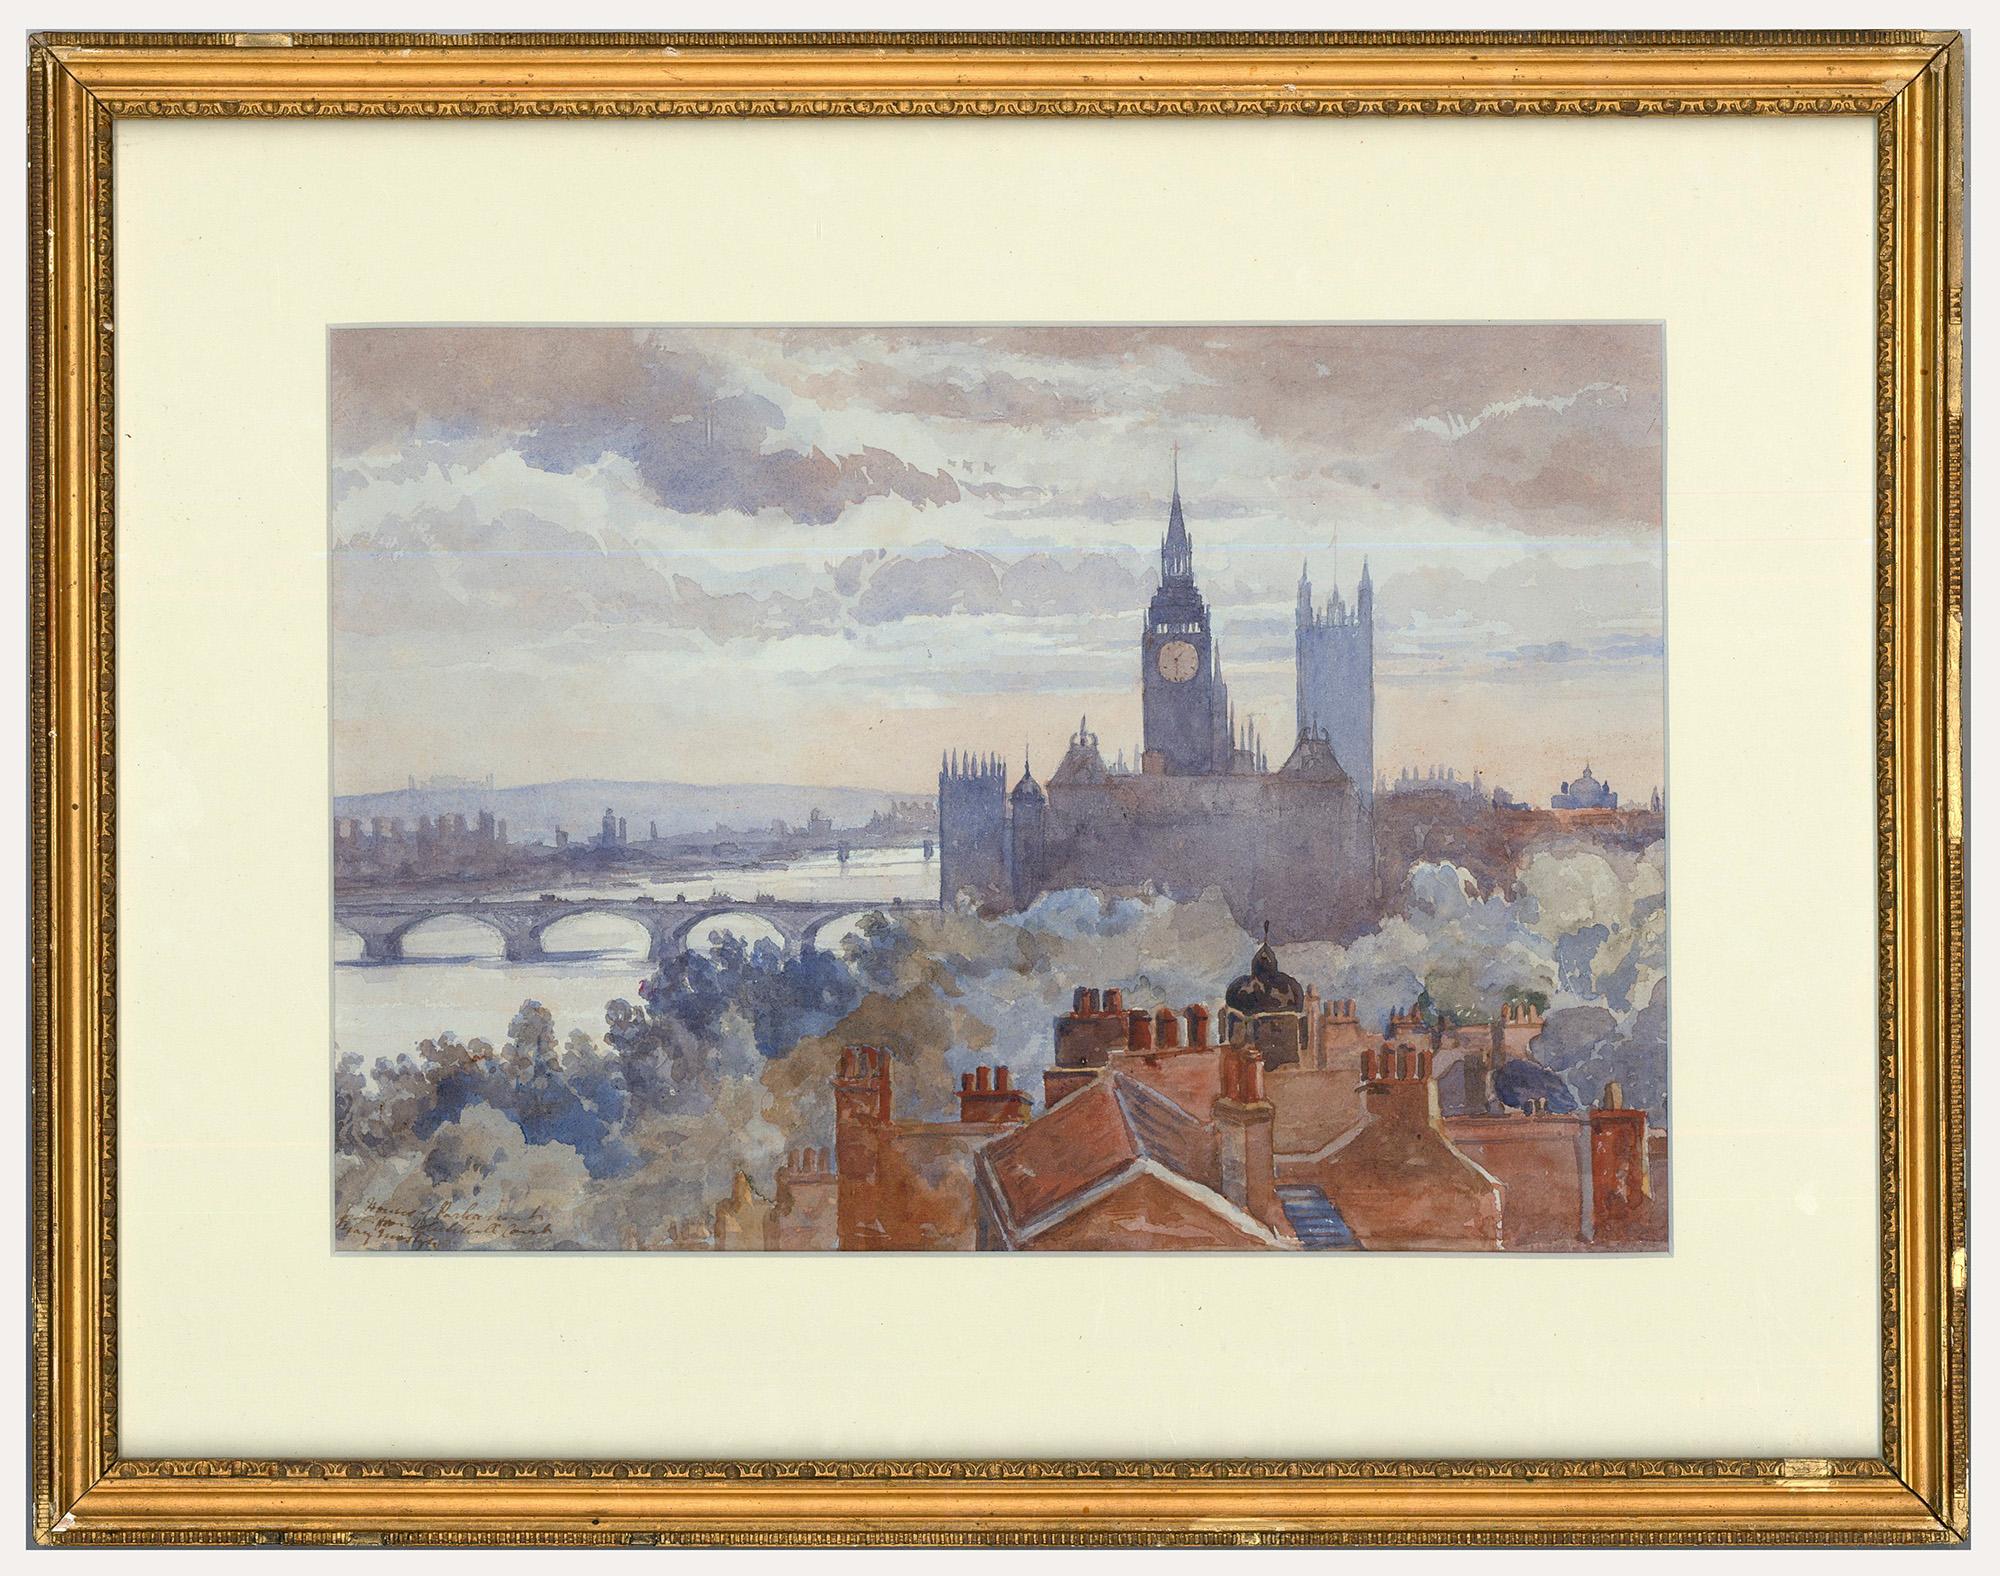 Unknown Landscape Art - Mid 20th Century Watercolour - Houses of Parliament from Whitehall Court